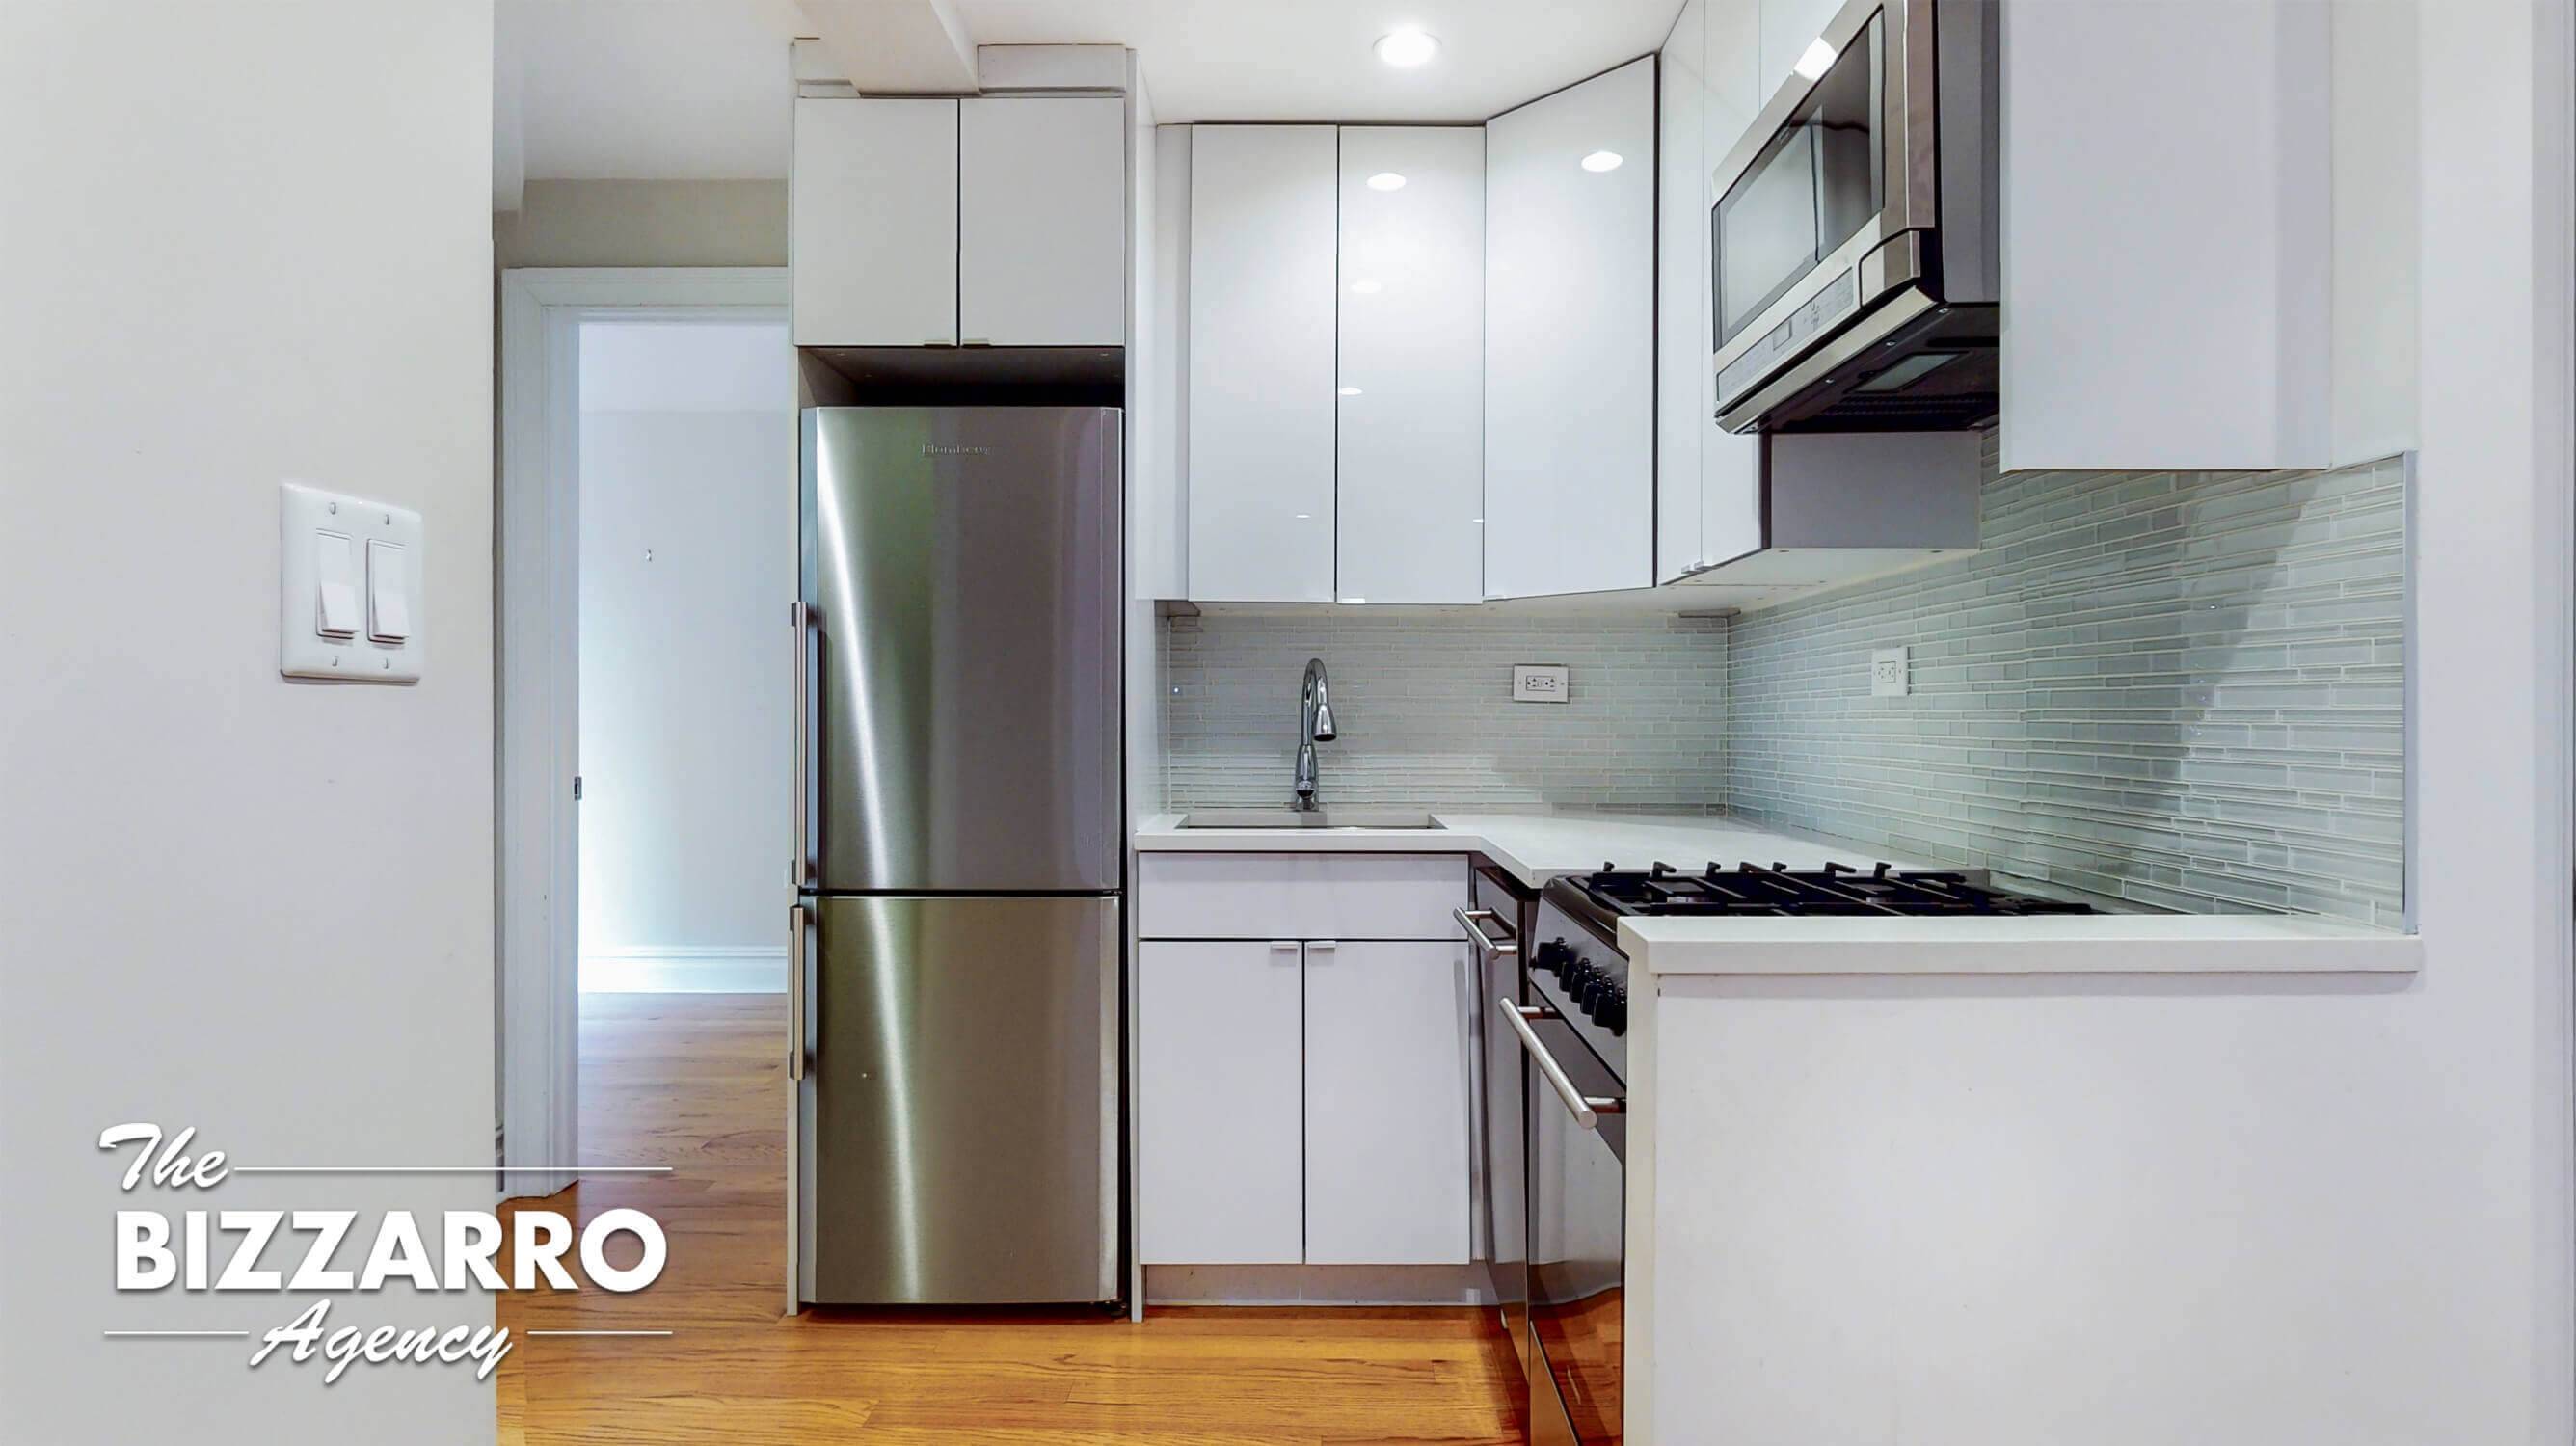 Renovated INVESTOR FRIENDLY CONDO Bennett Sixty Nine This modern 1BD 1BA condo features an open layout chef's kitchen with white custom cabinetry, quartz countertops, glass tile backsplash and a suite ...